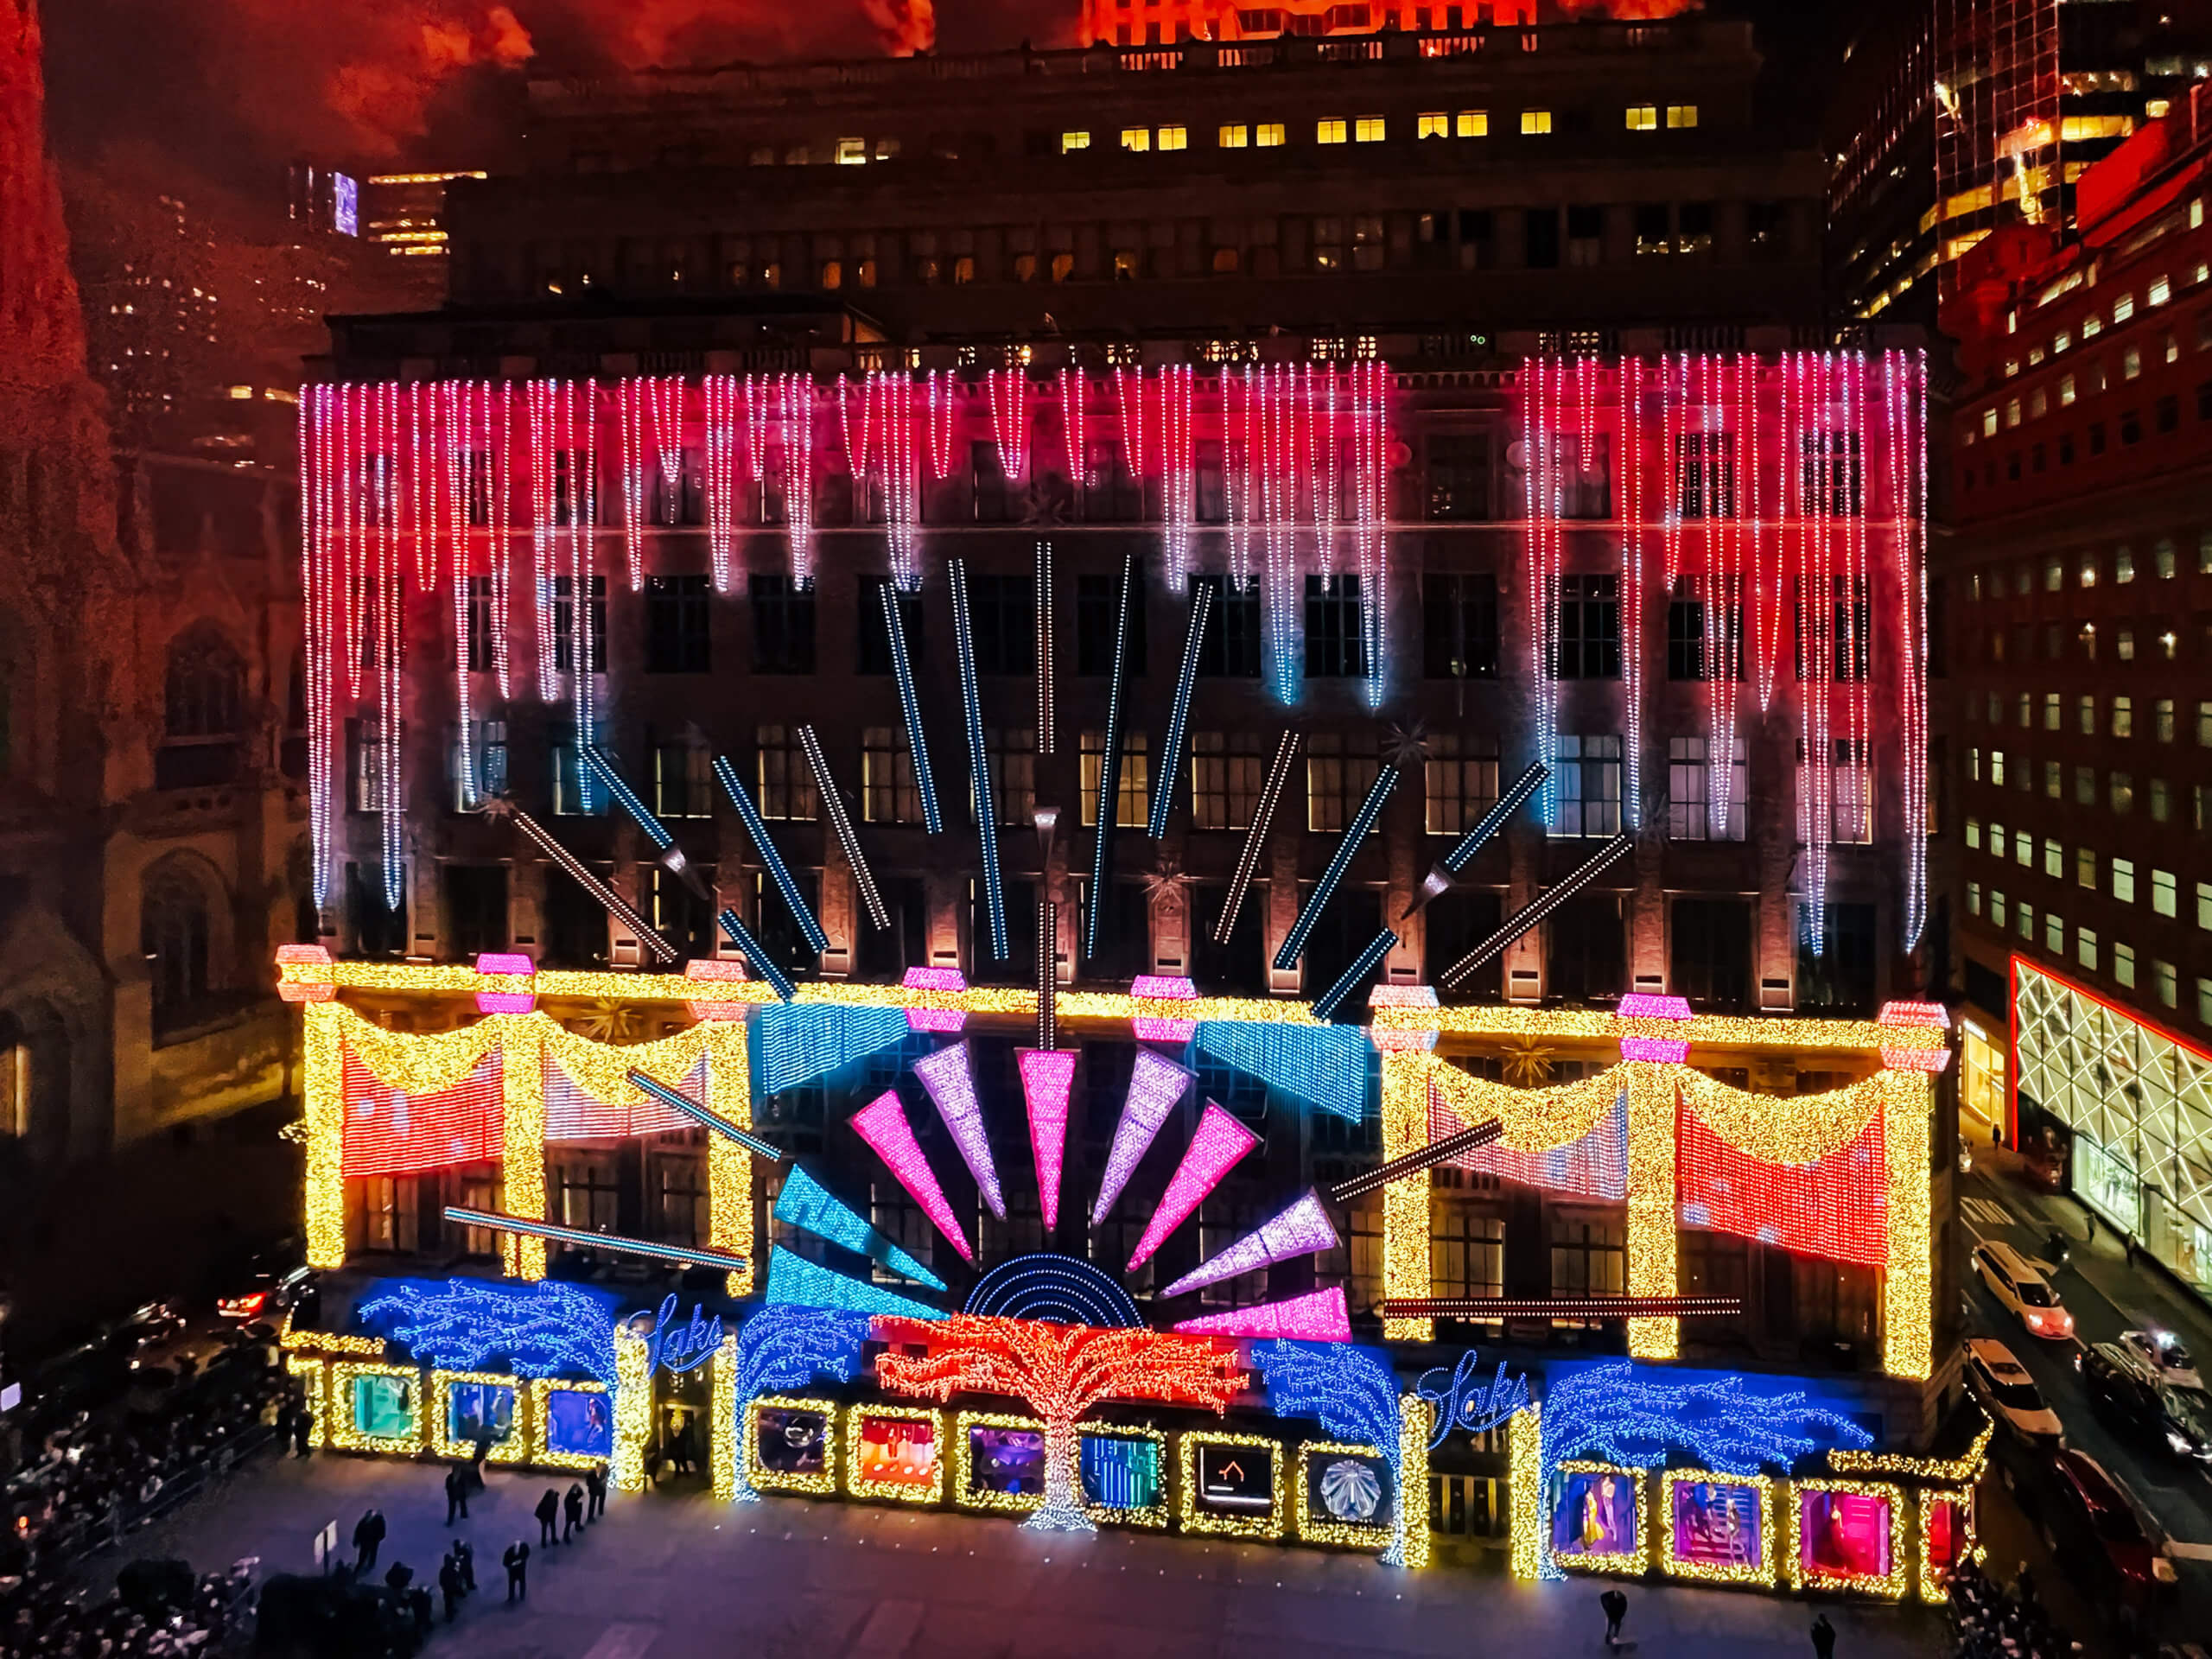 Saks Fifth Avenue's NYC holiday light display gets a 2020 spin